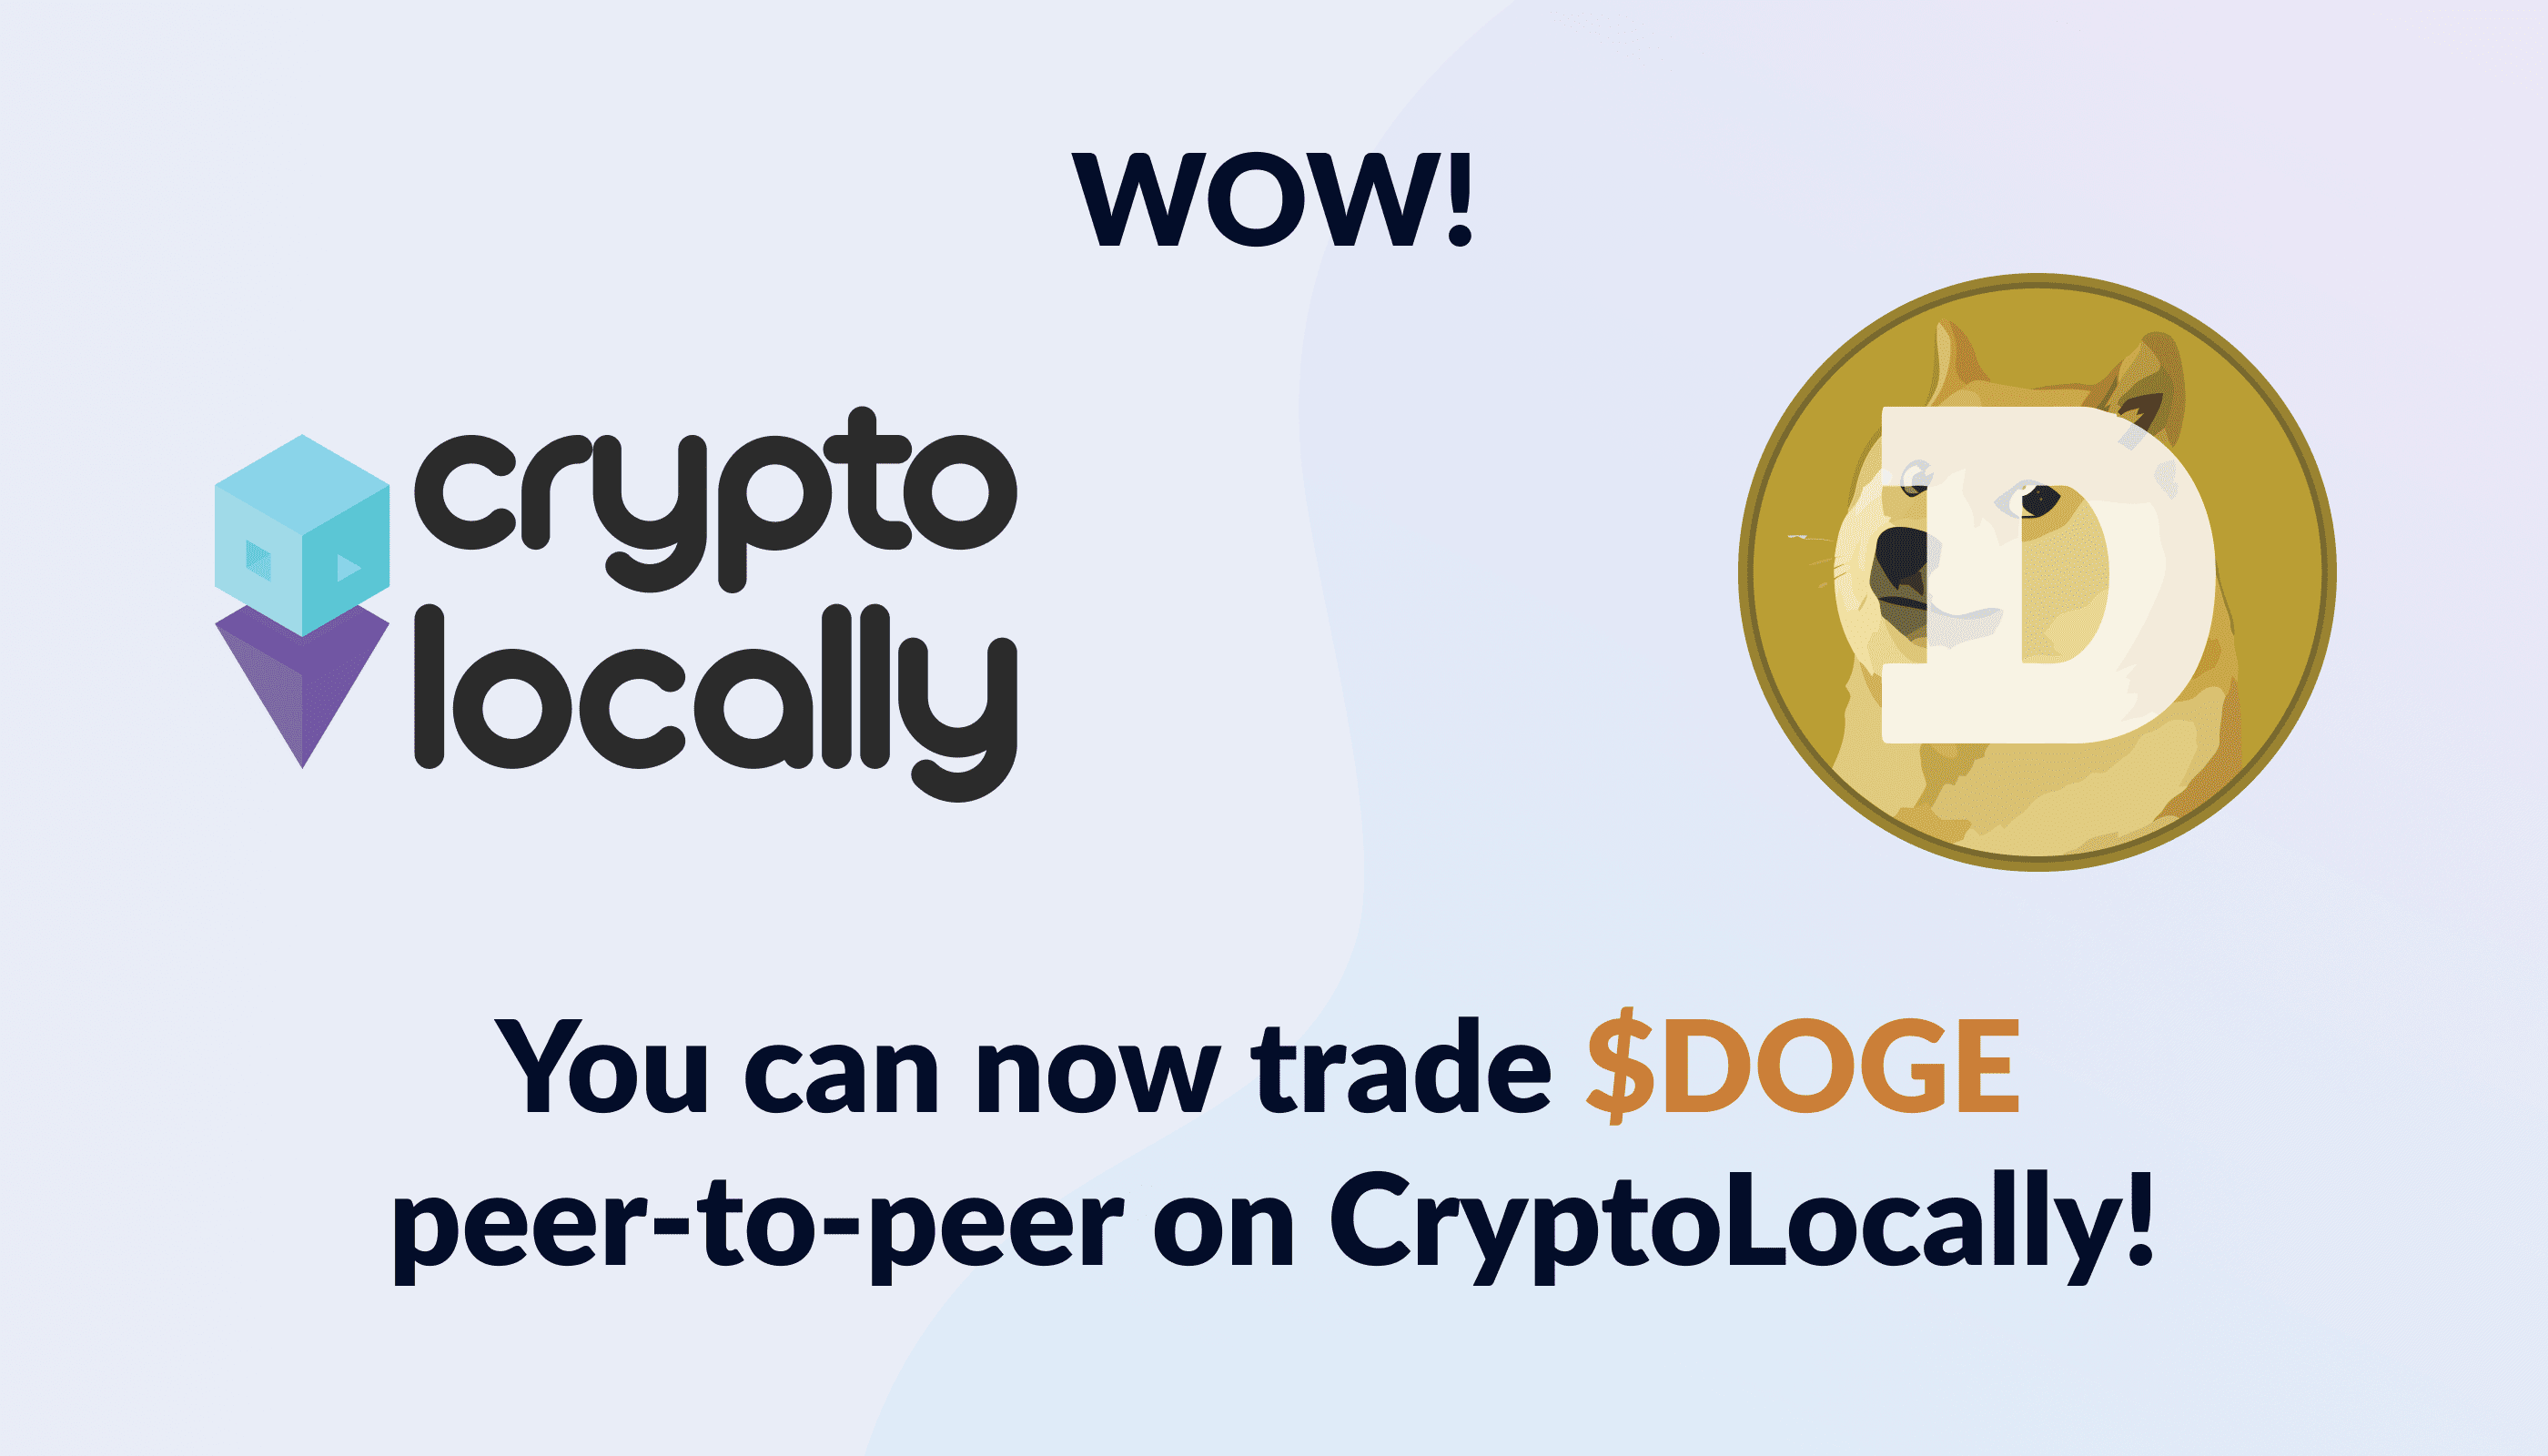 CryptoLocally Community Votes To Add Dogecoin